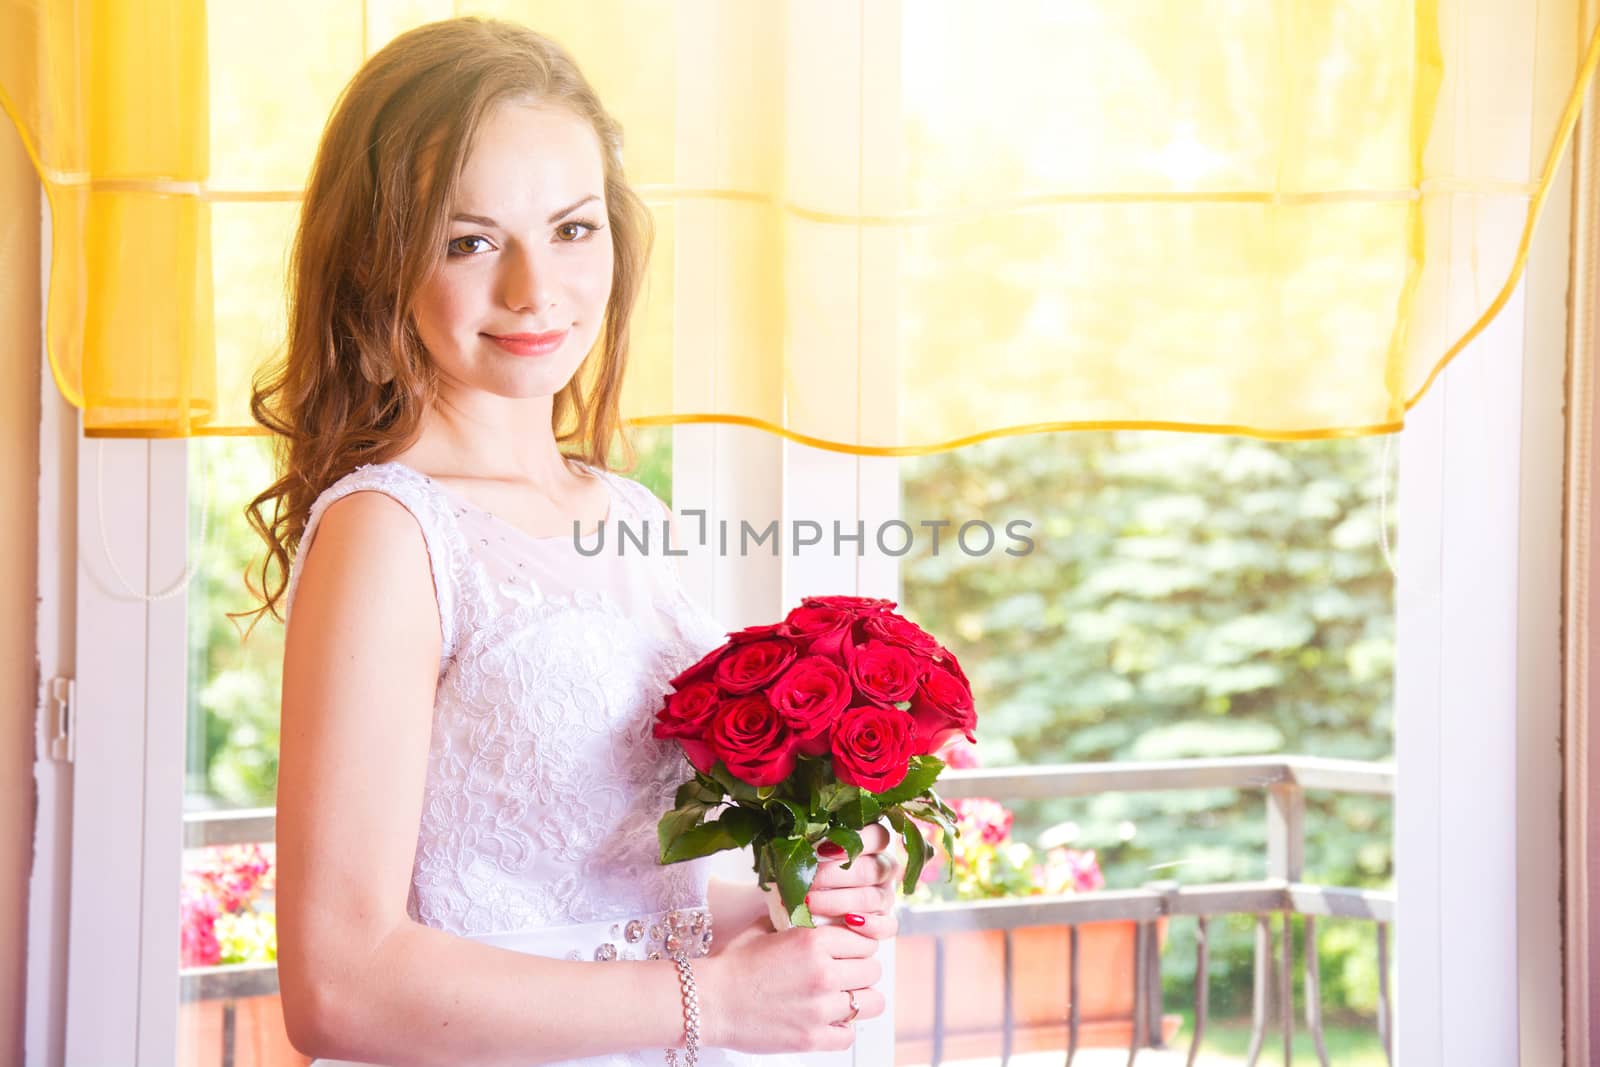 Young beautiful bride in wedding dress with red rose bouquet. Marriage and wedding concept image.